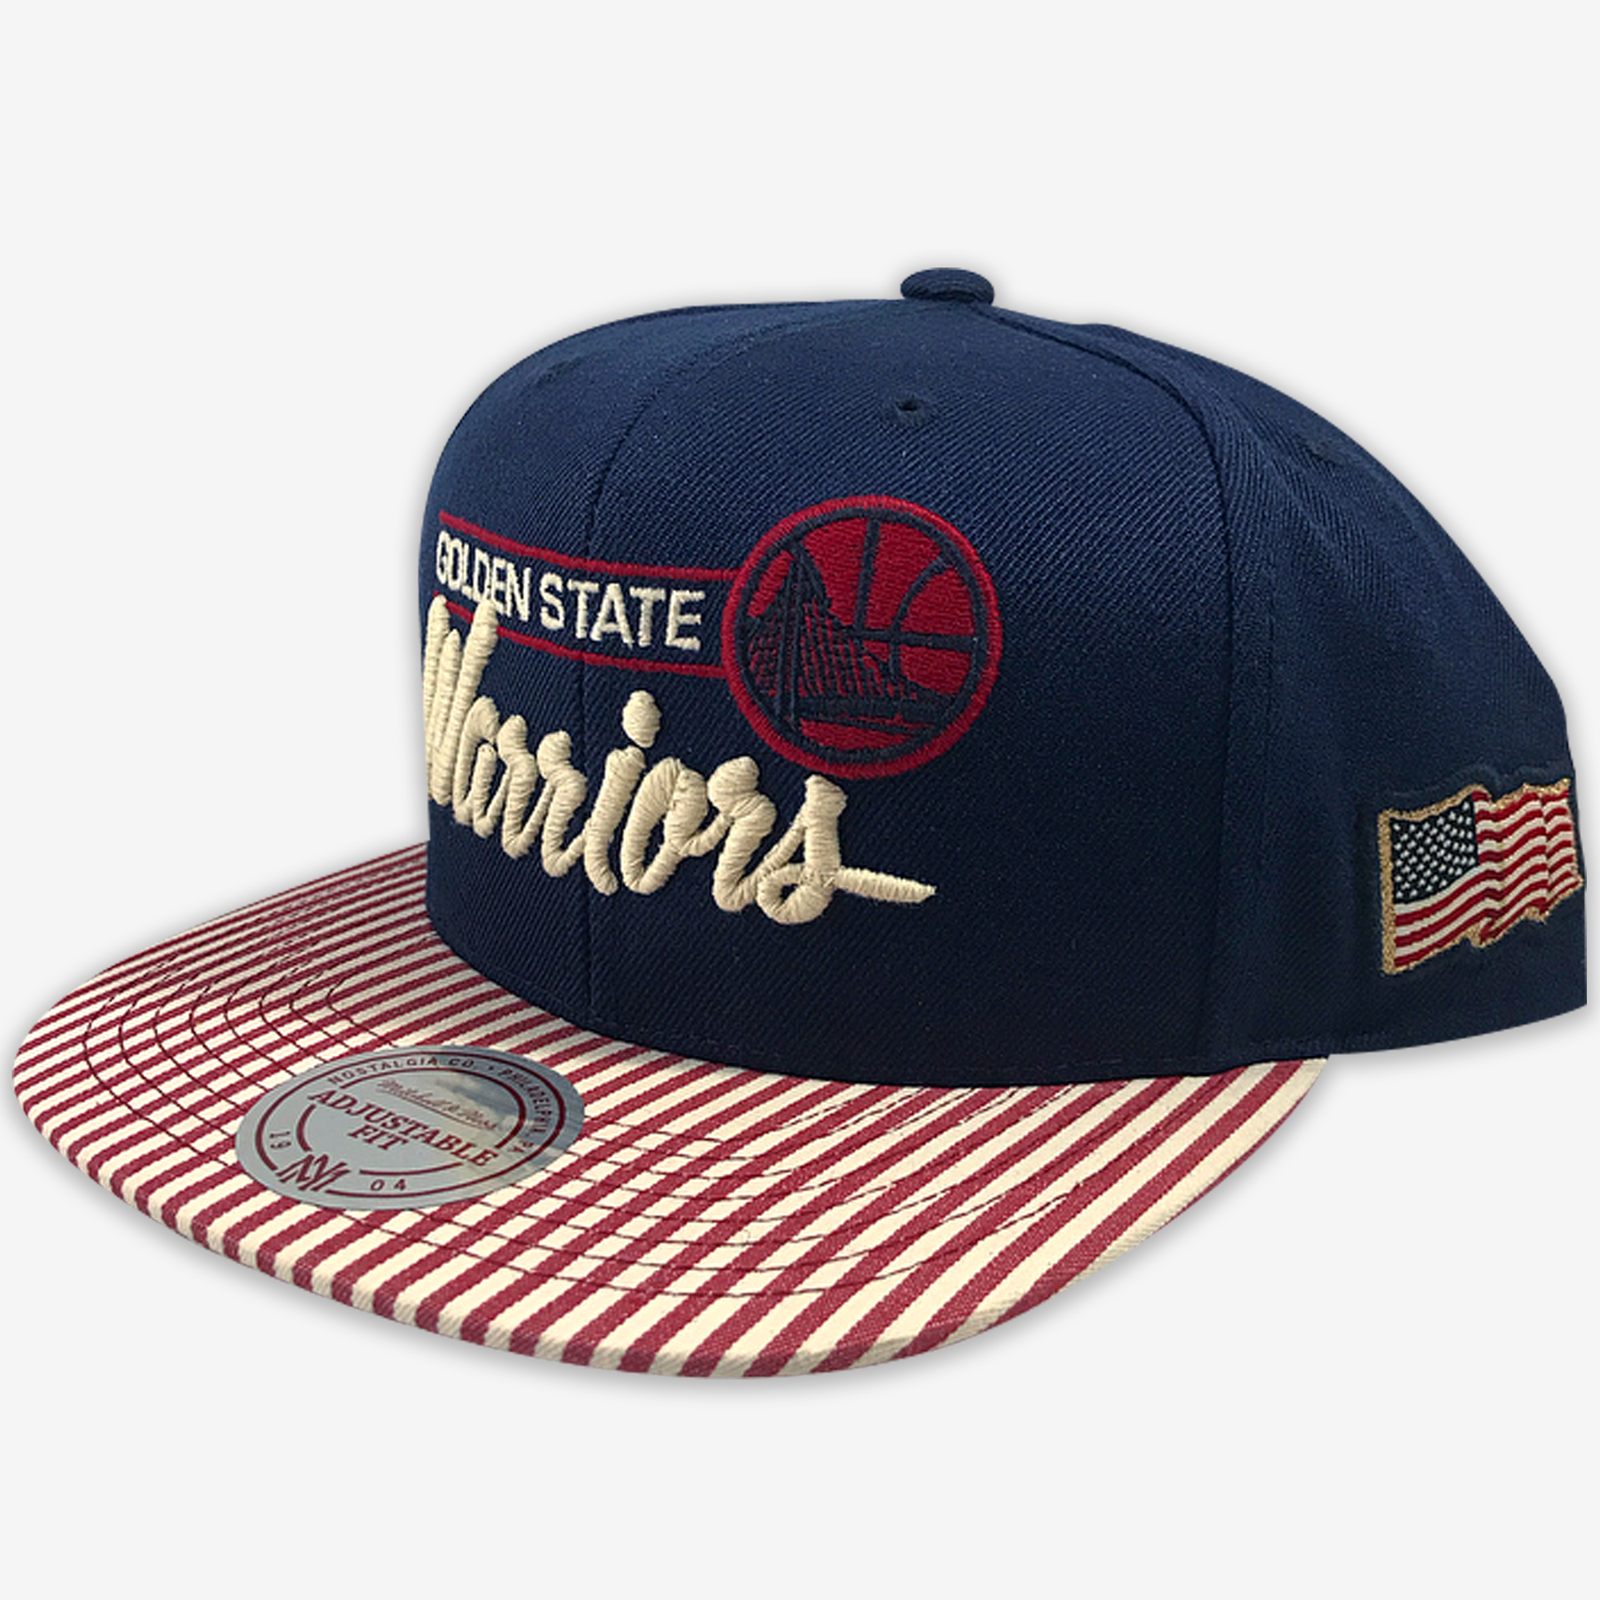 Golden State Warriors 4th of July Mitchell & Ness Snapback